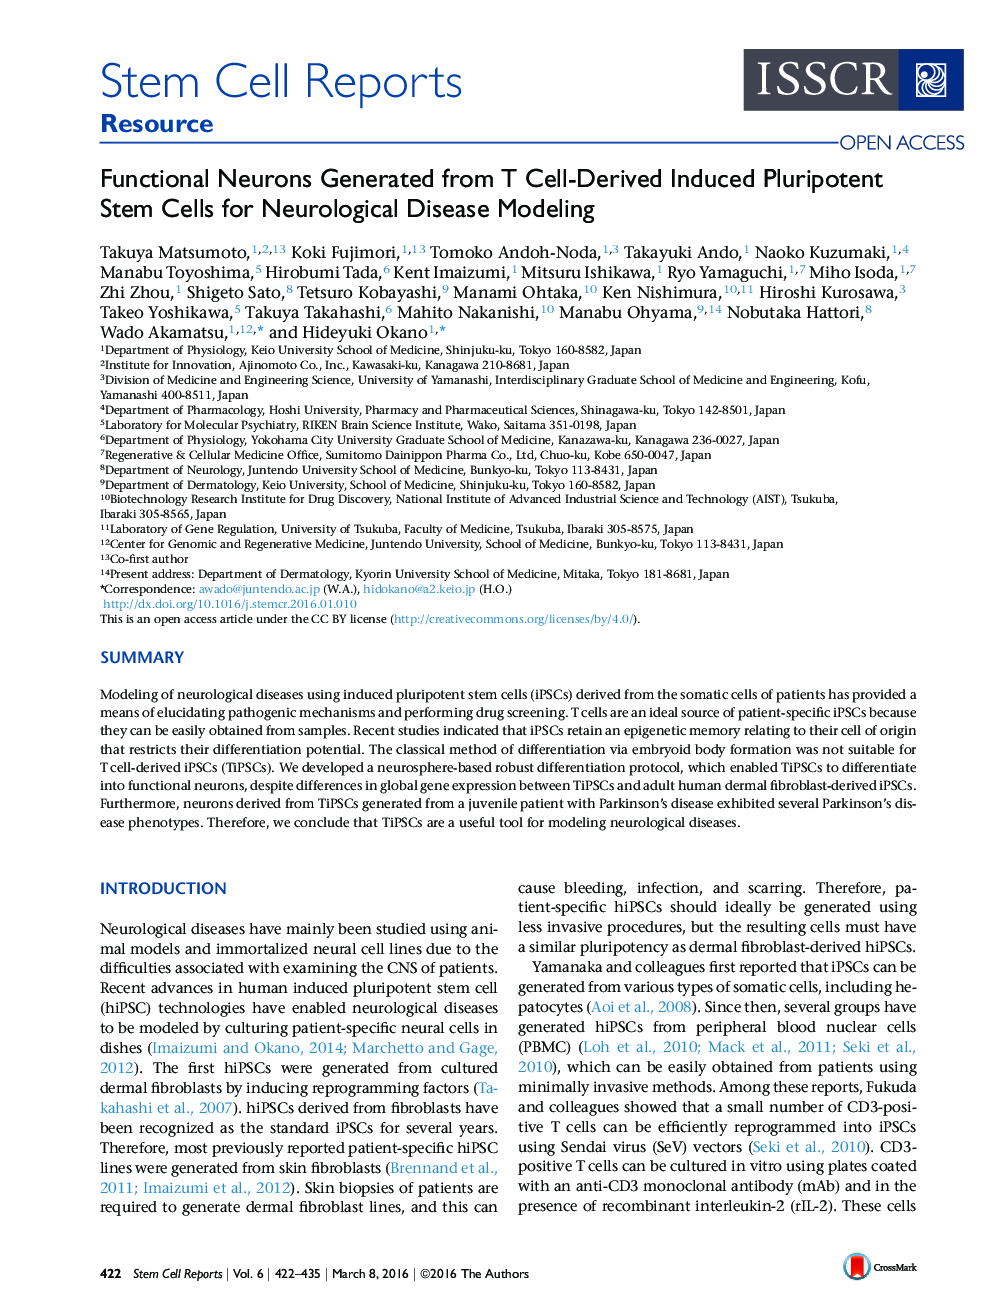 Functional Neurons Generated from T Cell-Derived Induced Pluripotent Stem Cells for Neurological Disease Modeling 